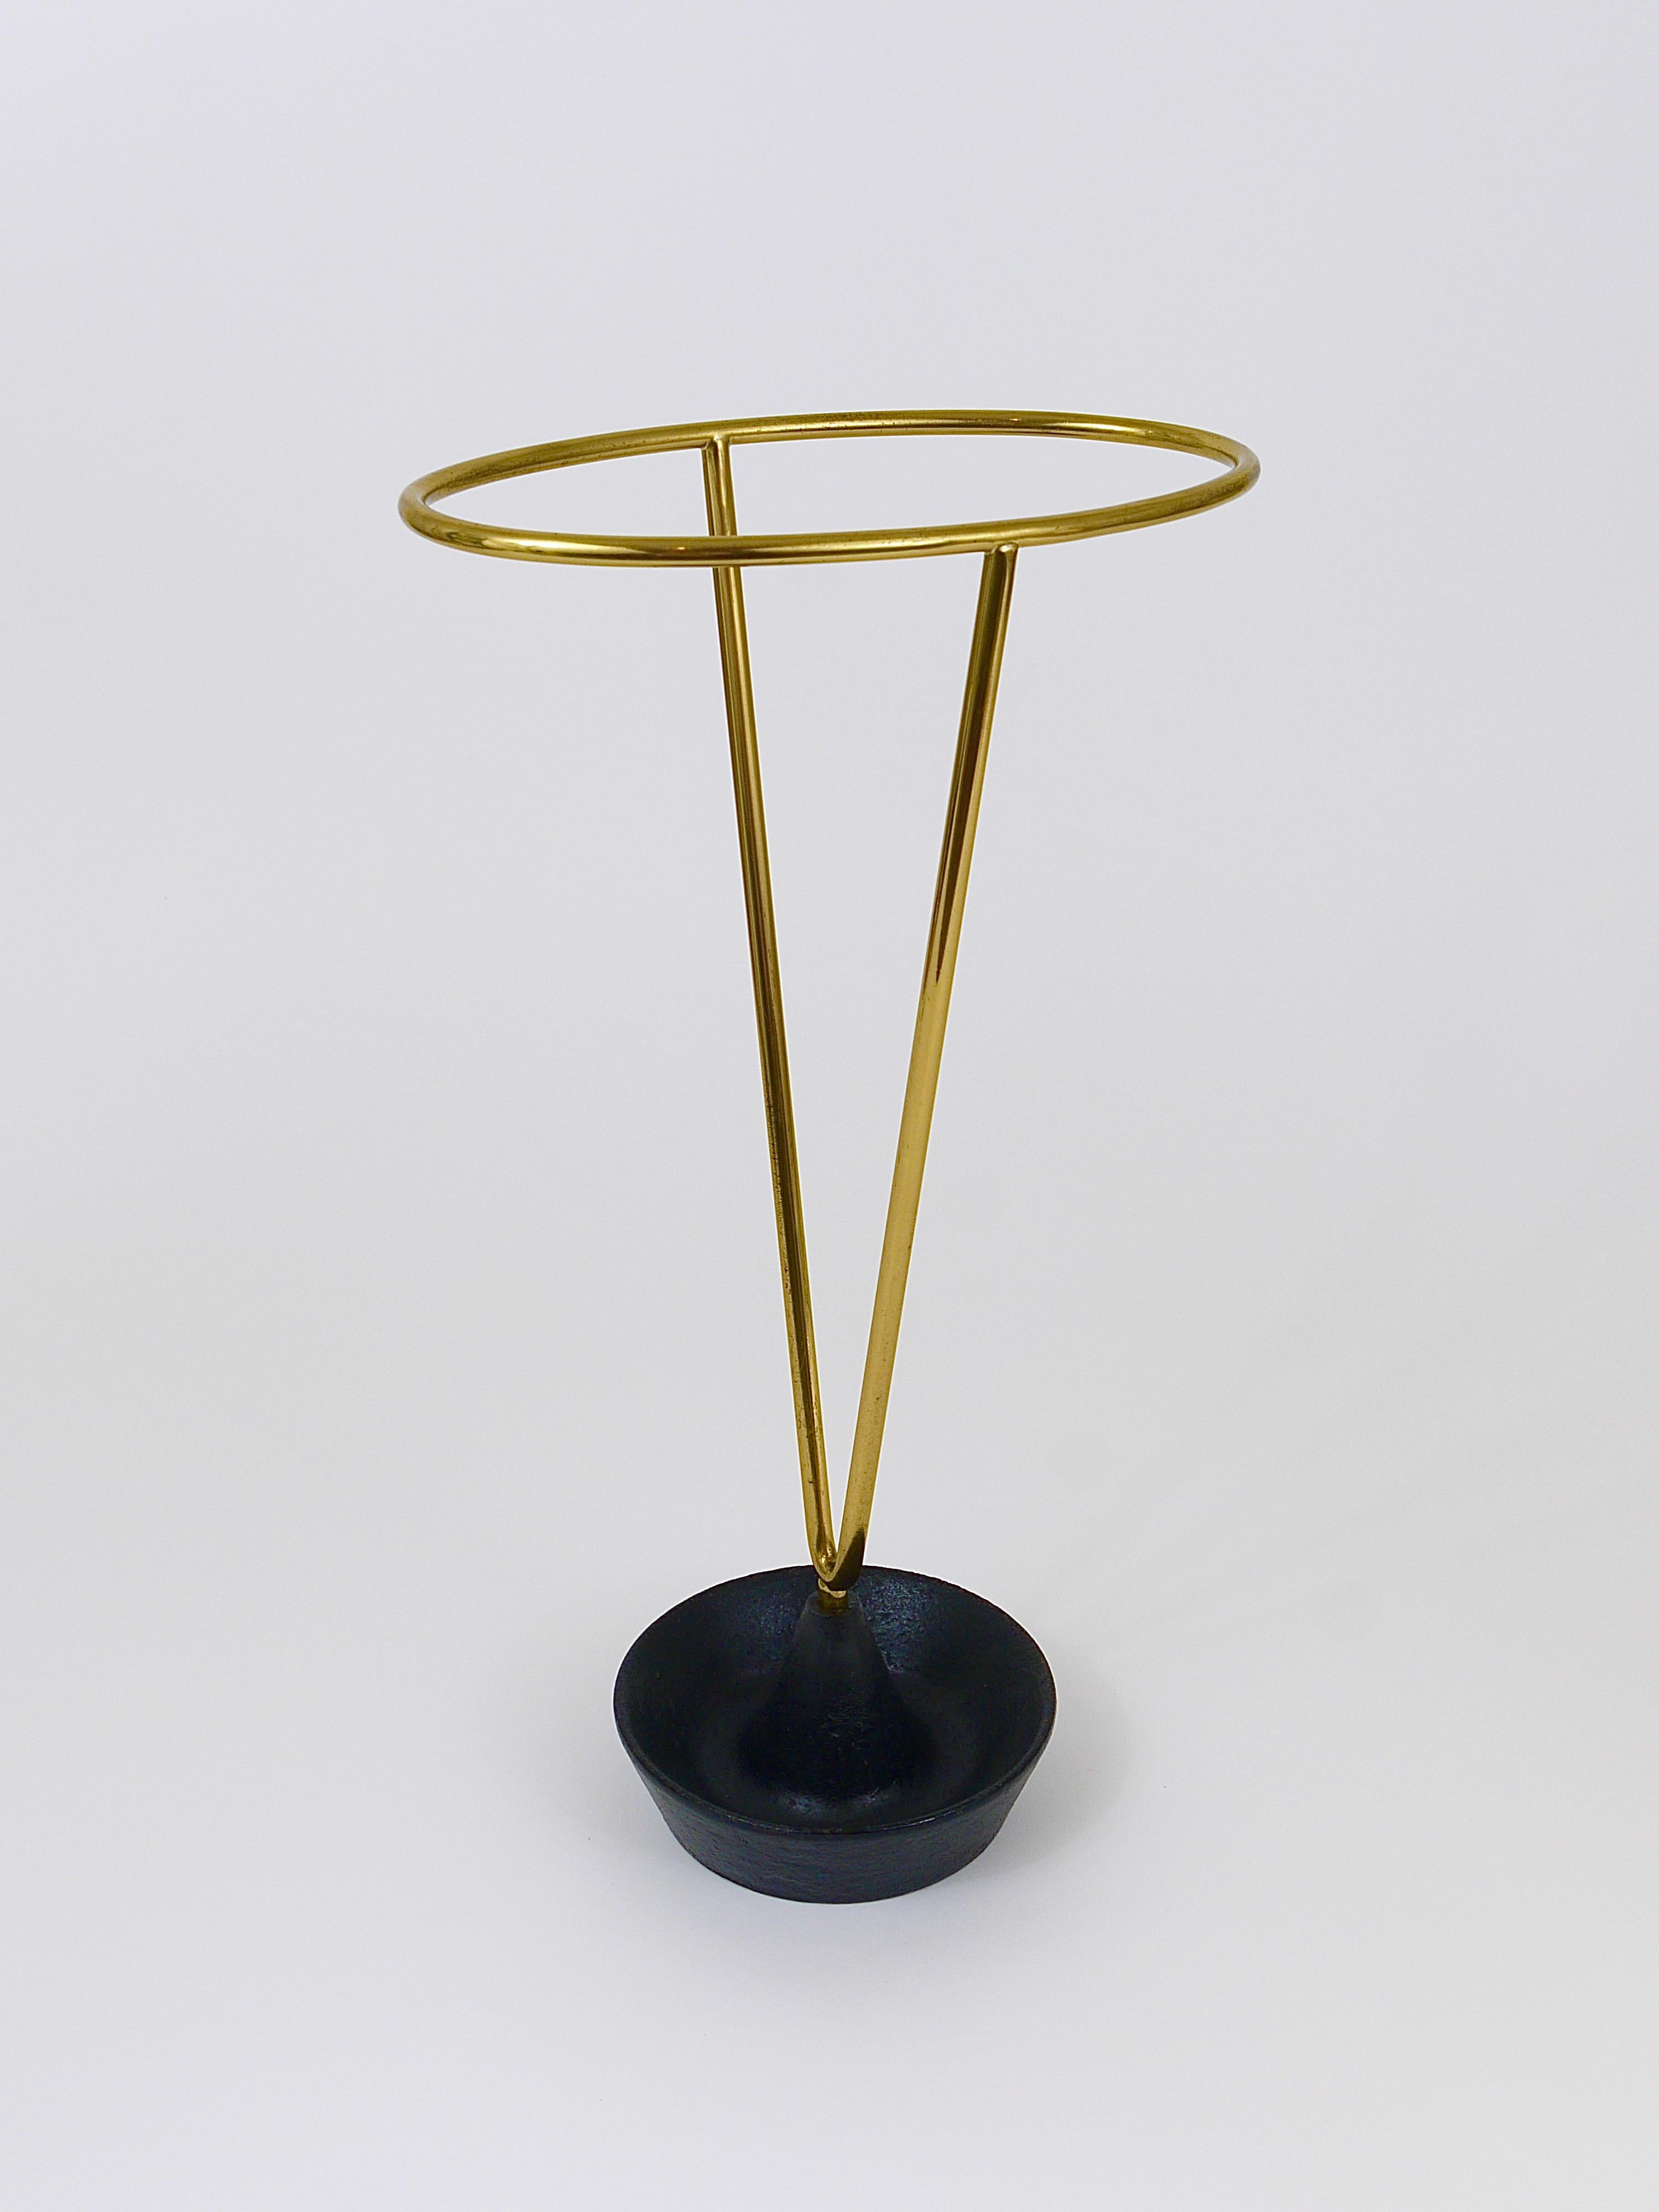 Carl Auböck Mid-Century Brass and Cast Iron Umbrella Stand, Austria, 1950s For Sale 8